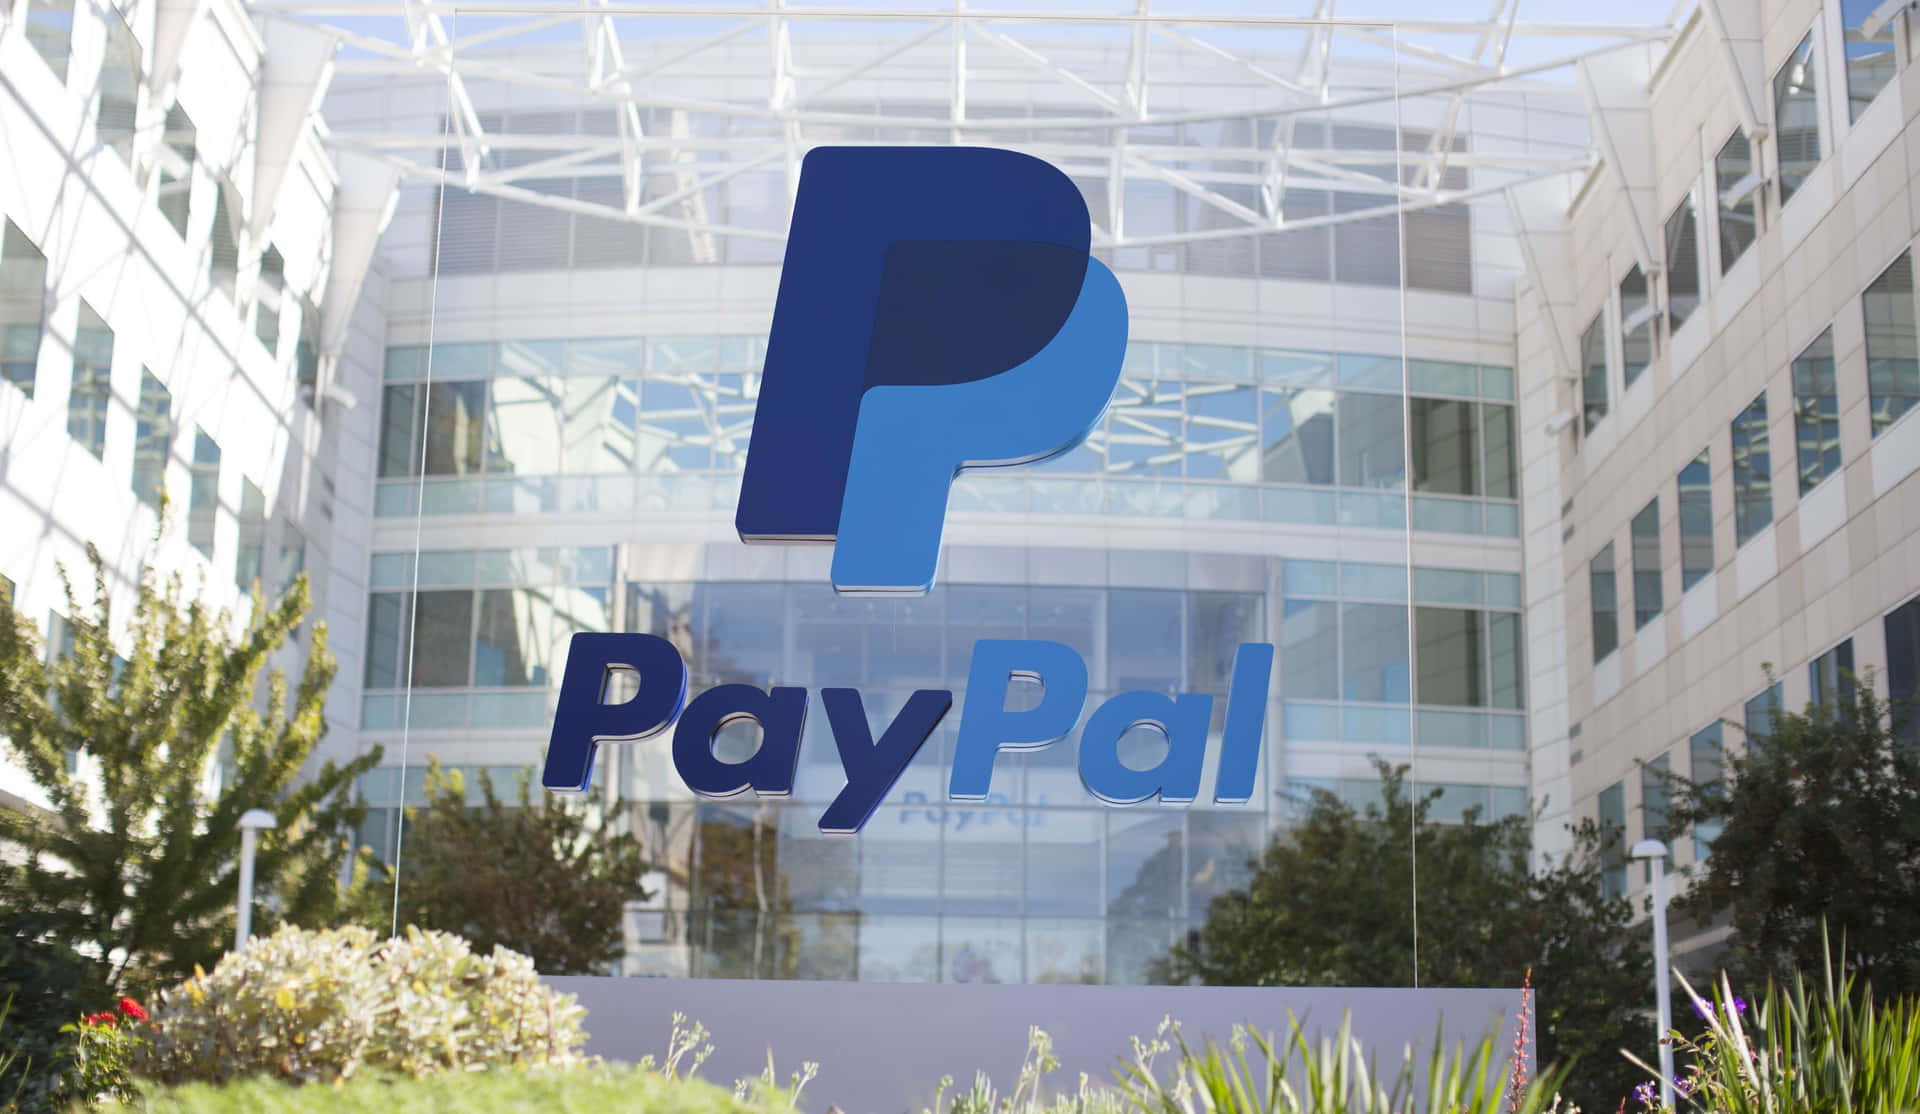 Paypal: Your digital wallet, secure and convenient